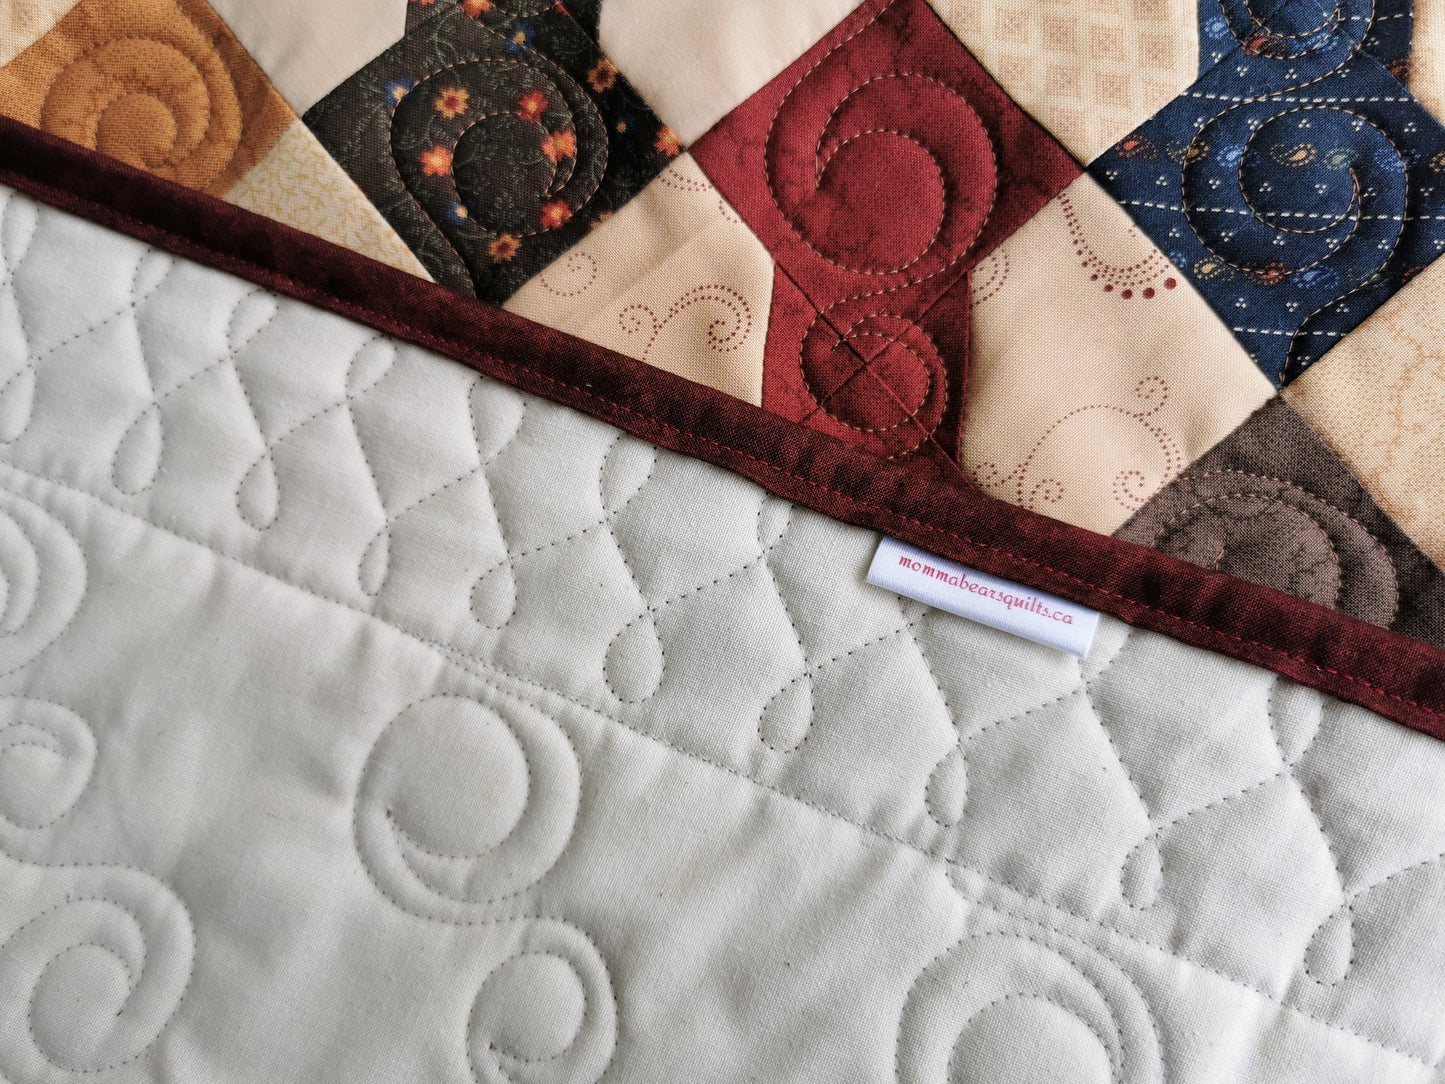 Square Quilted Table Runner, Bowtie Patchwork Scrap Quilt